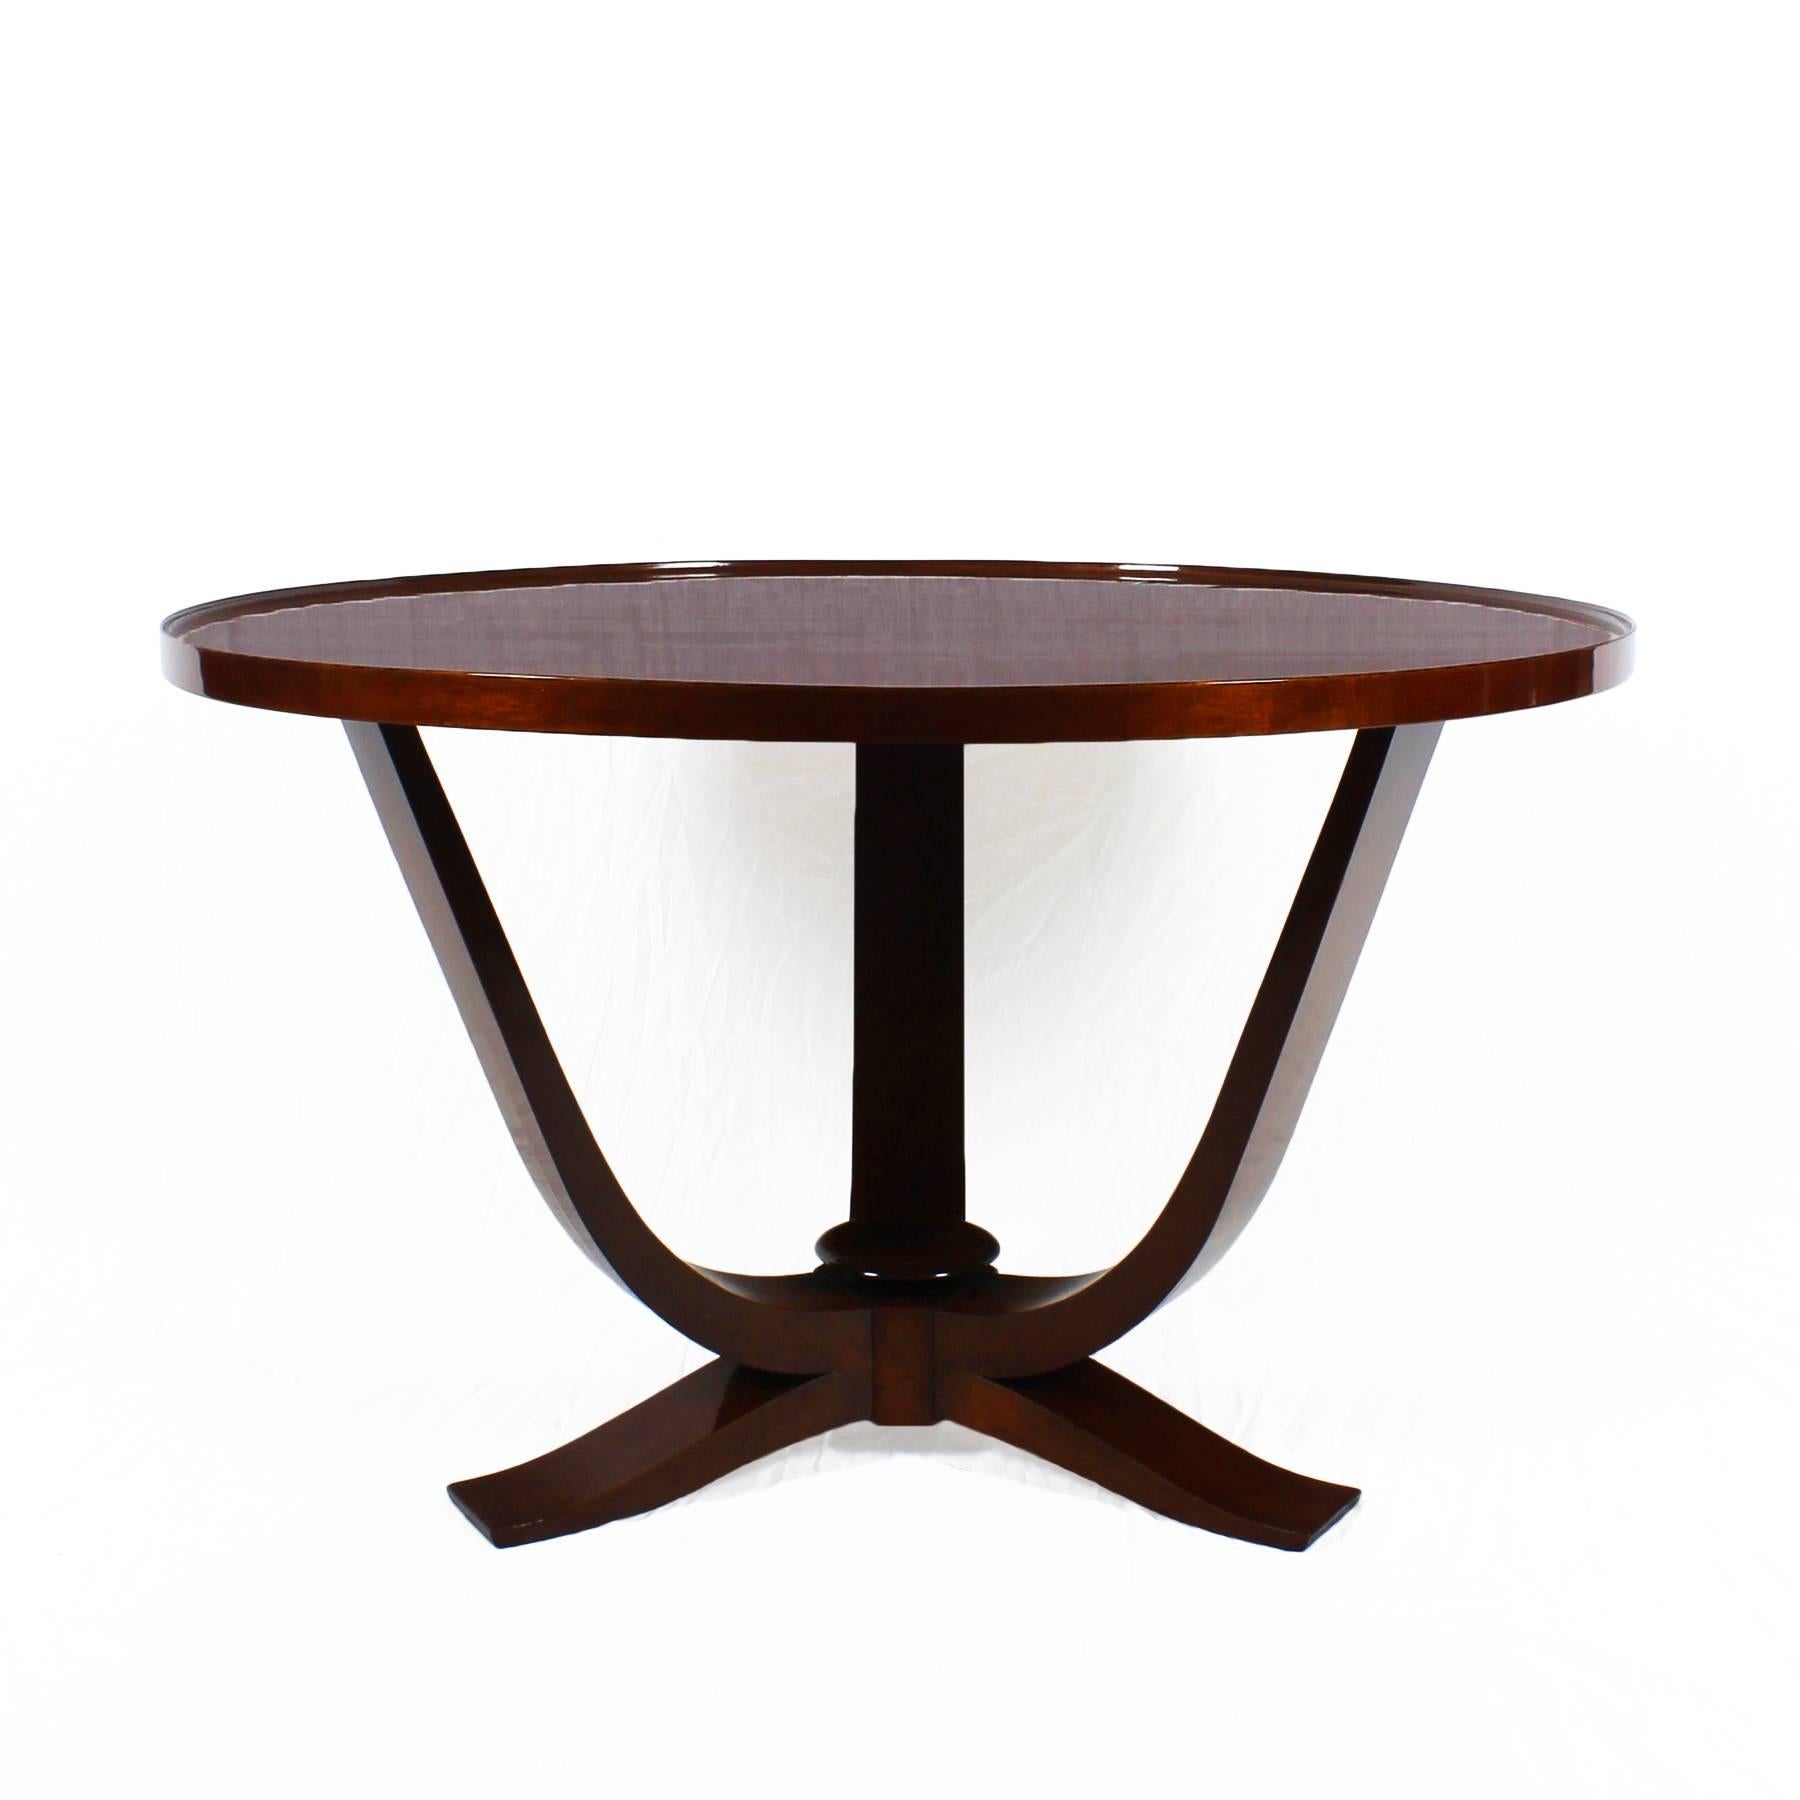 Large Art Deco tripod center table, solid mahogany stand, plywood top with burr mahogany in four parts veneer (ripples on top), French polish.
Attributed to Maison De Coene.

Belgium, circa 1935.